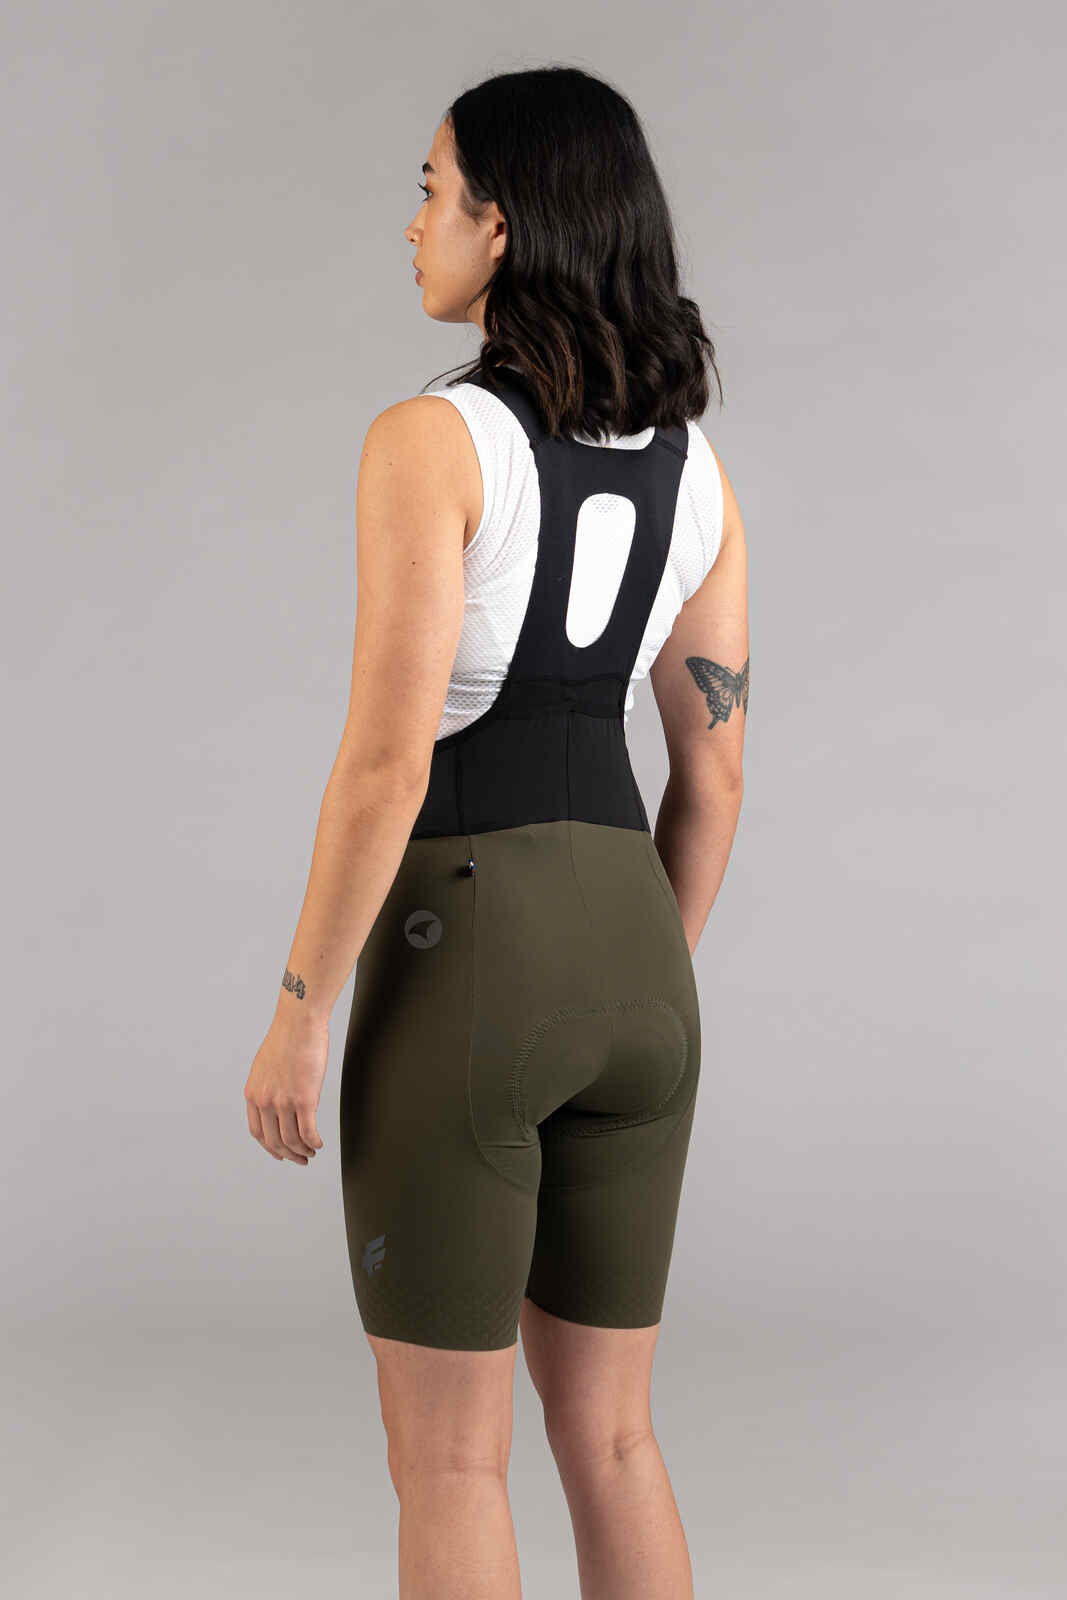 Women's Olive Green Cycling Bibs - Flyte Back View